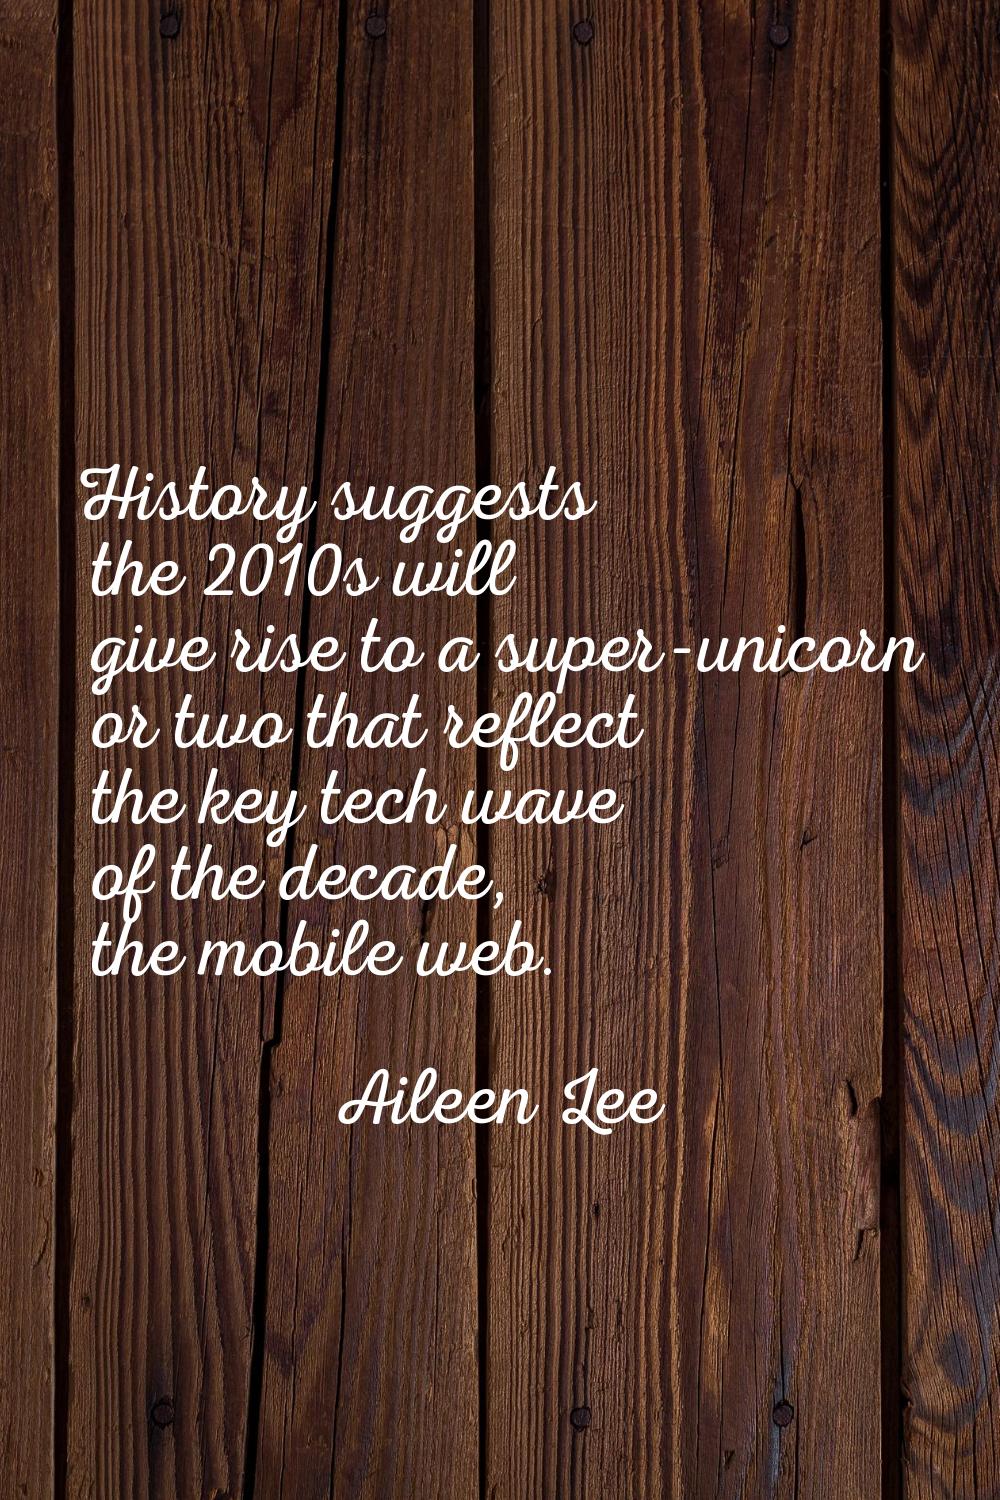 History suggests the 2010s will give rise to a super-unicorn or two that reflect the key tech wave 